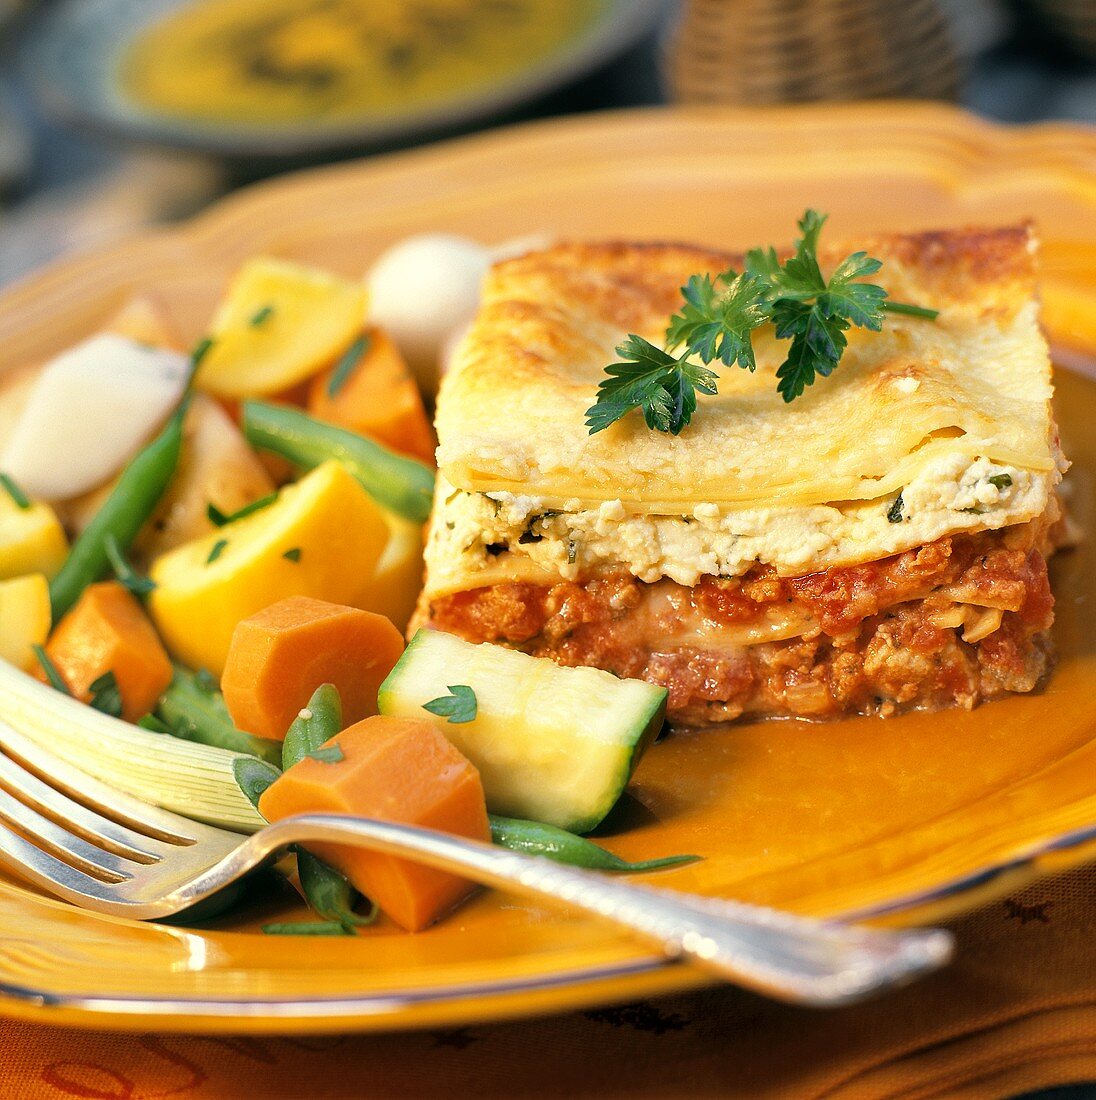 Beef Lasagne with Side of Steamed Vegetables